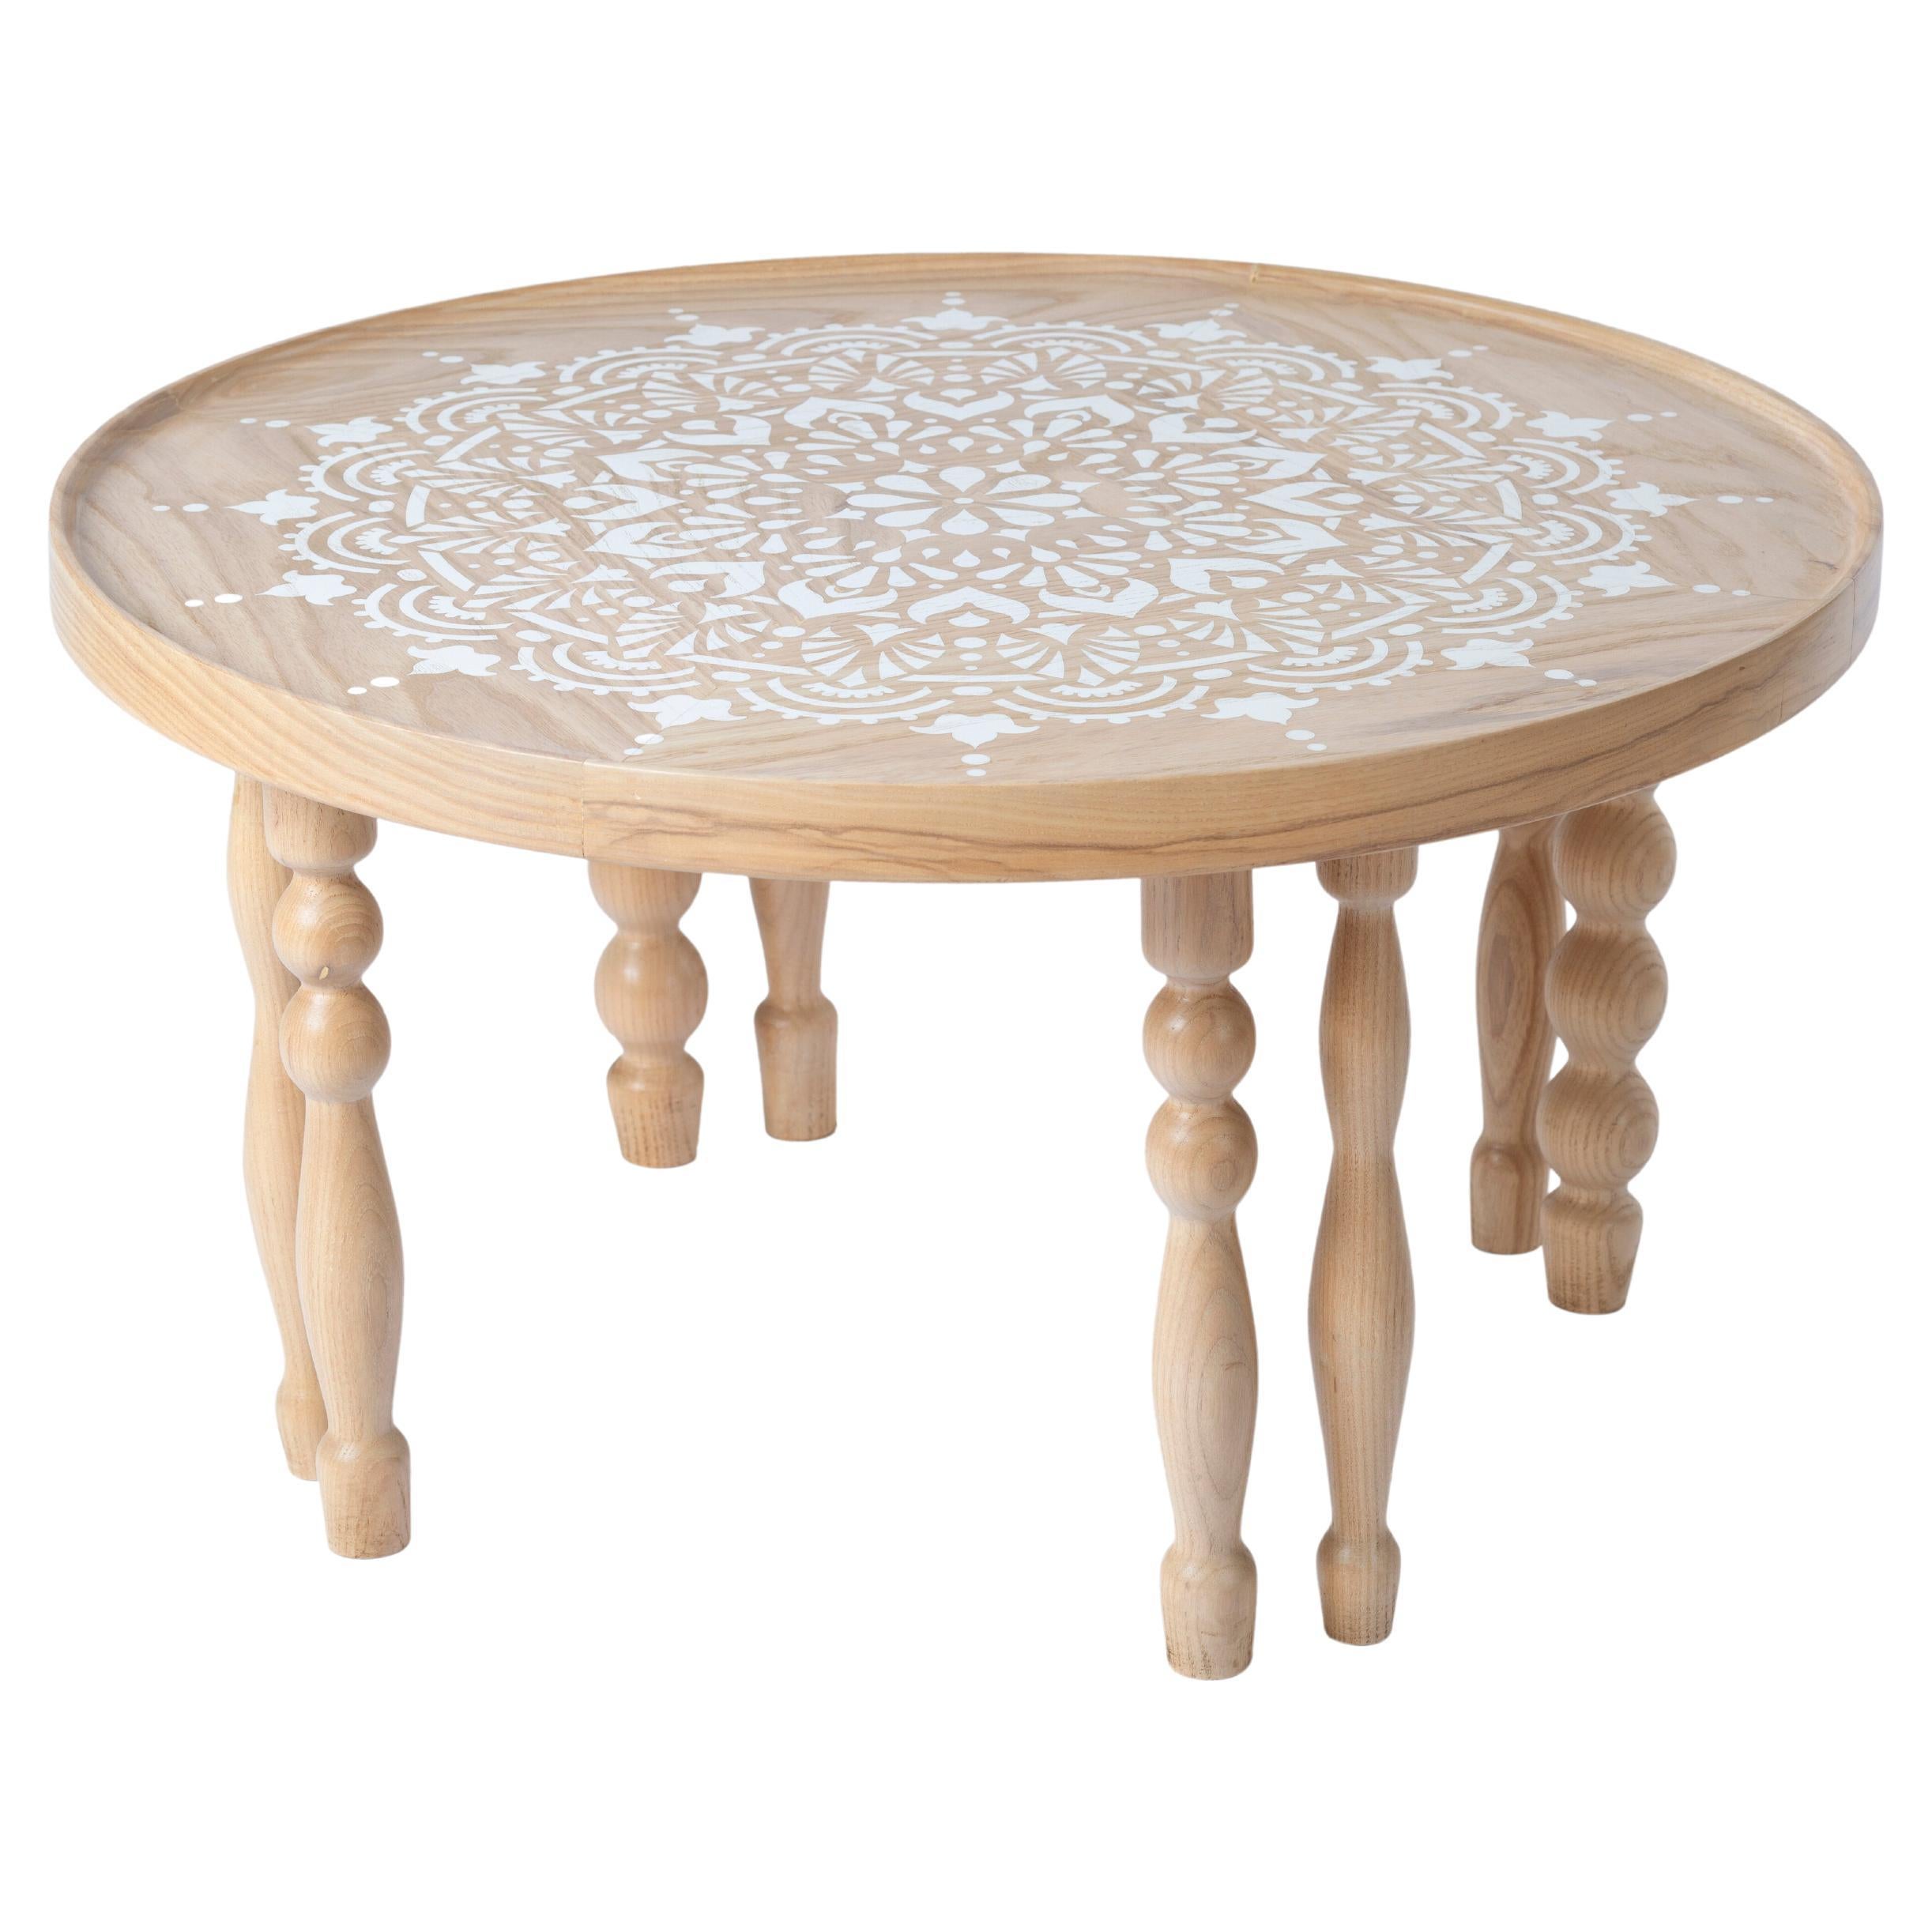 Ash Wood Coffee Table with Arabesque-Inspired Legs & Stenciled Mandala Motif